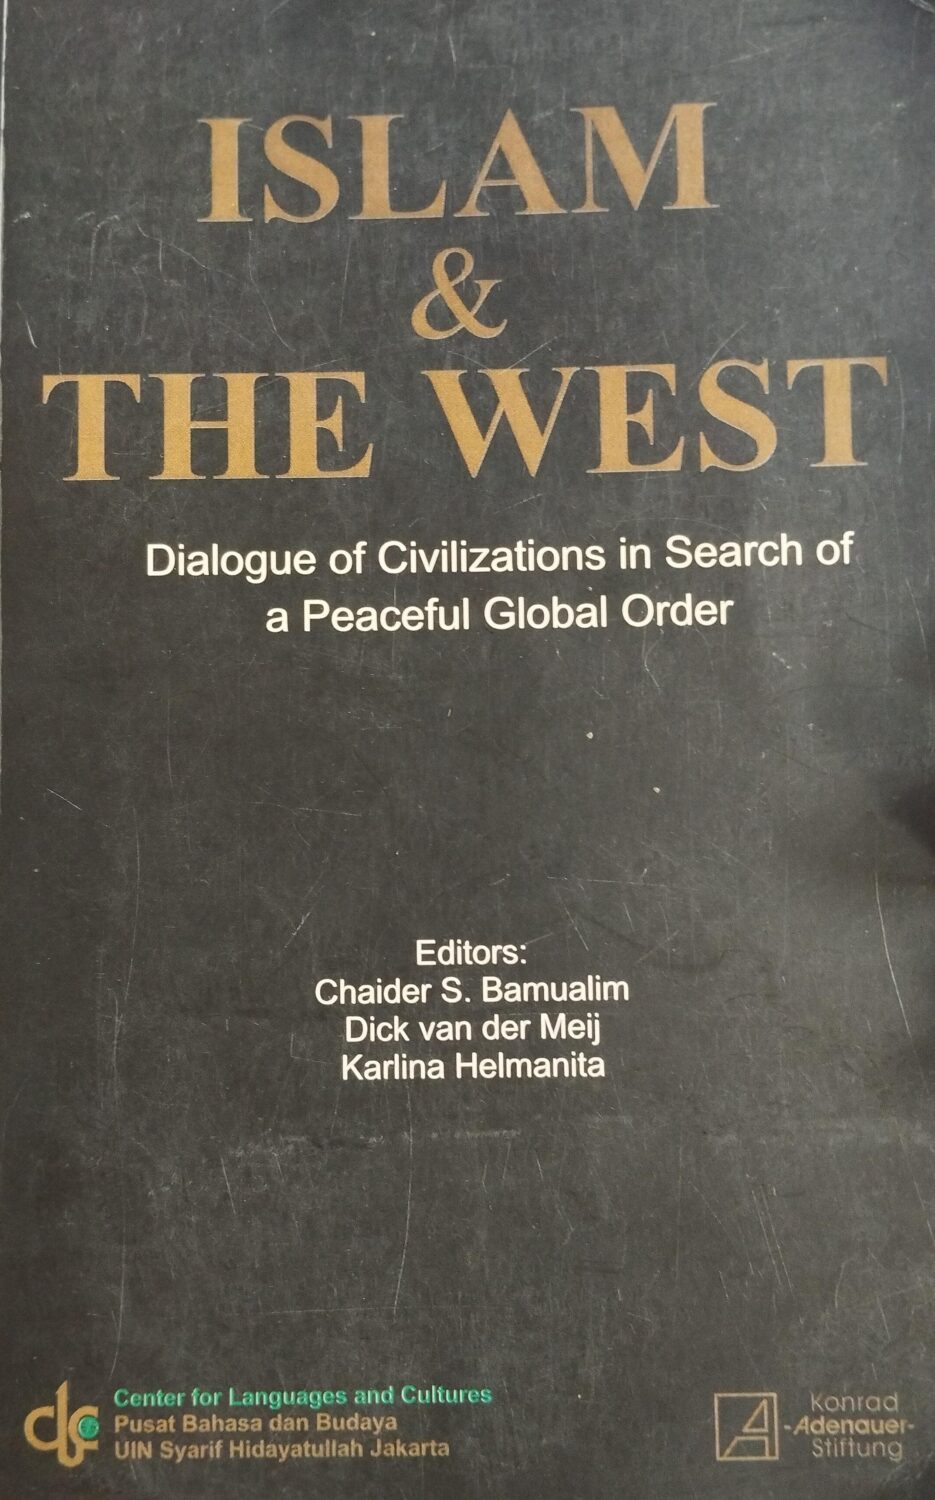 Islam & The west